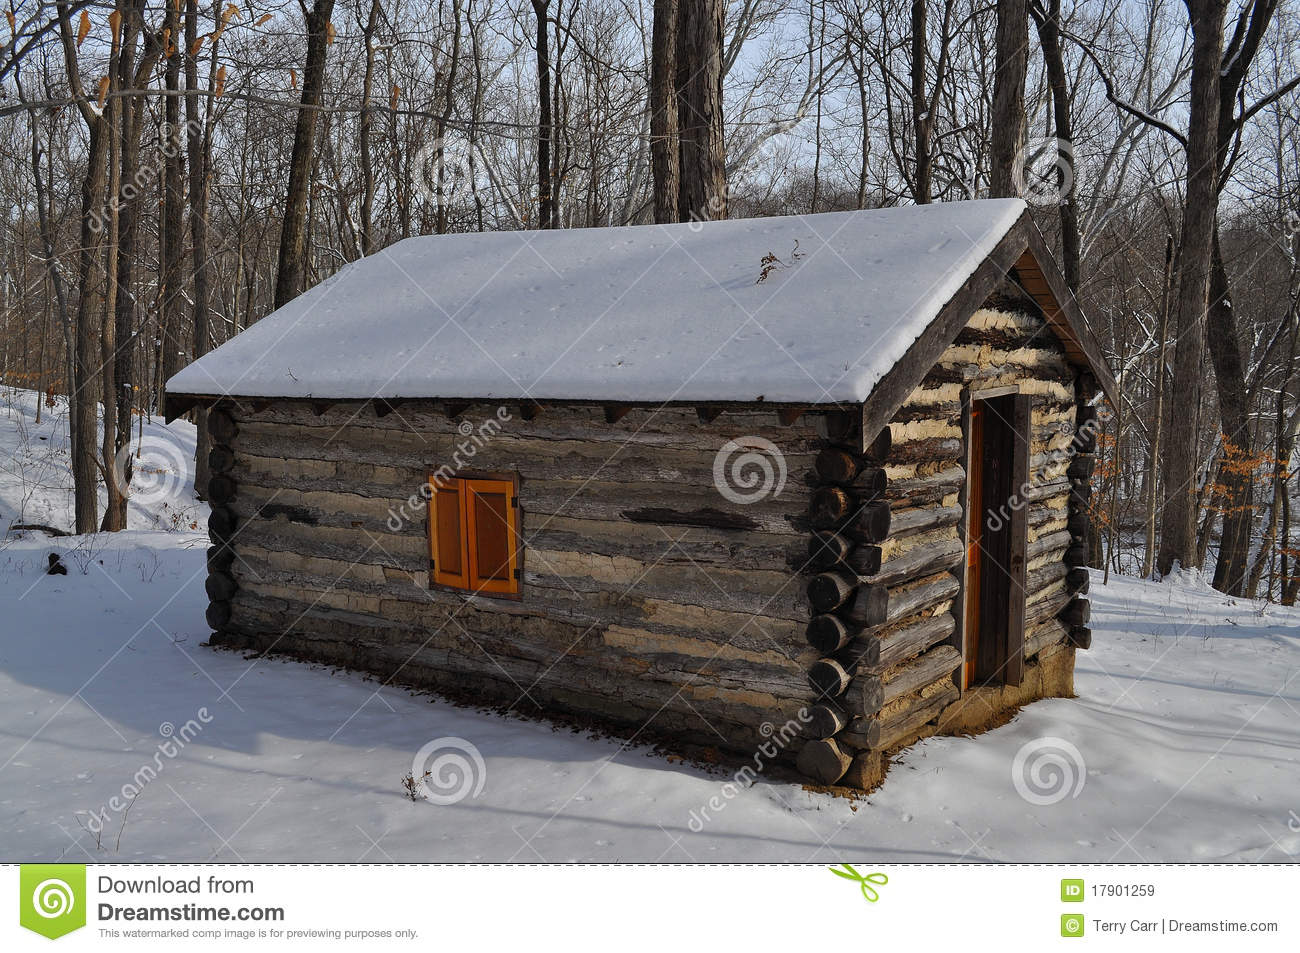 Scenic View Of Snow Covered Log Cabin In Winter With Wood Or Forest In